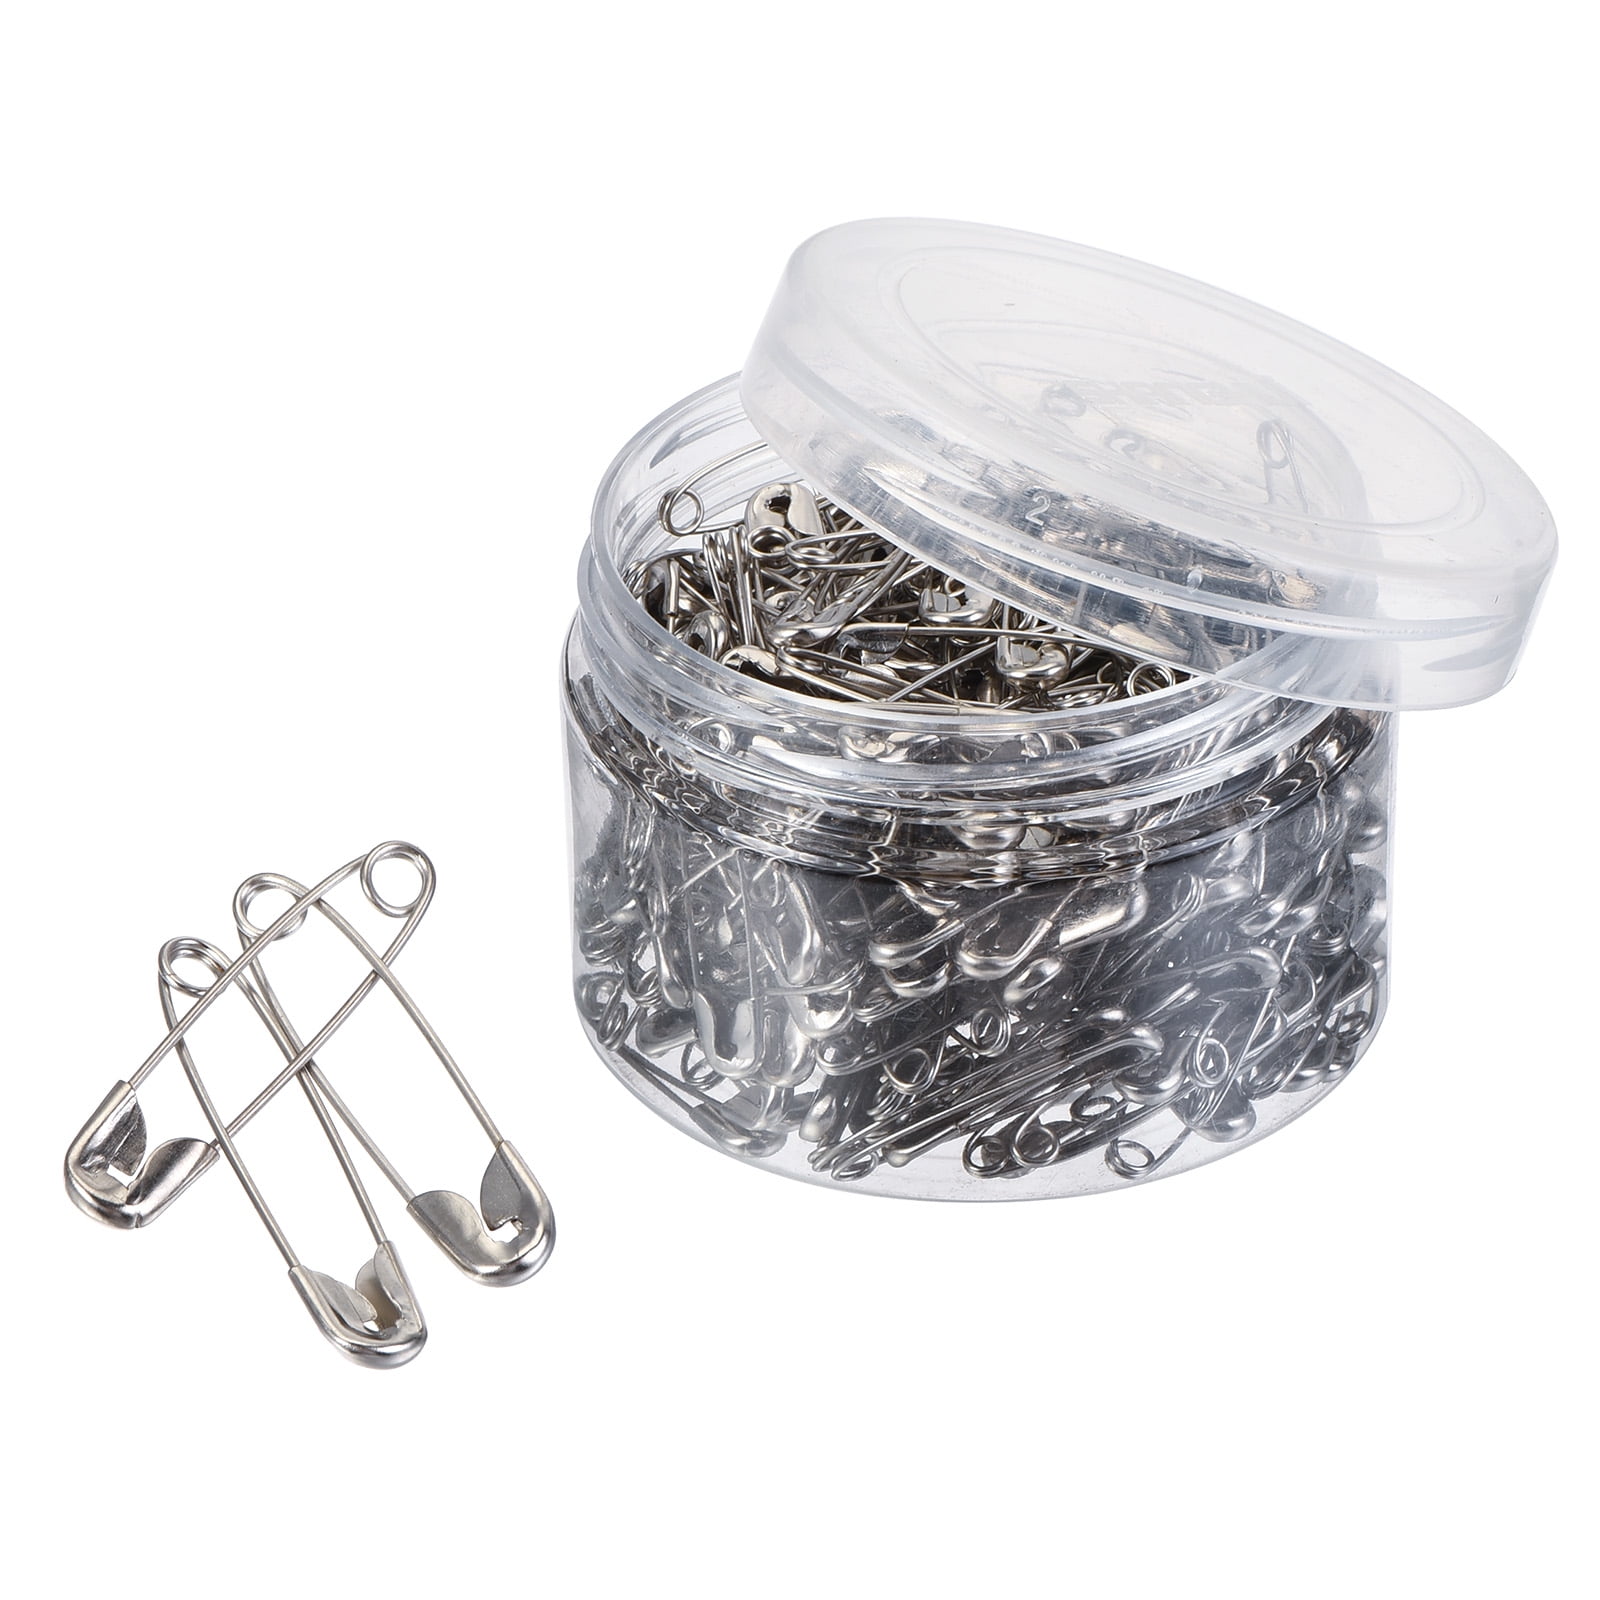 Silver Small Safety Pins Size 00-0.75 Inch 144 Pieces Premium Quality